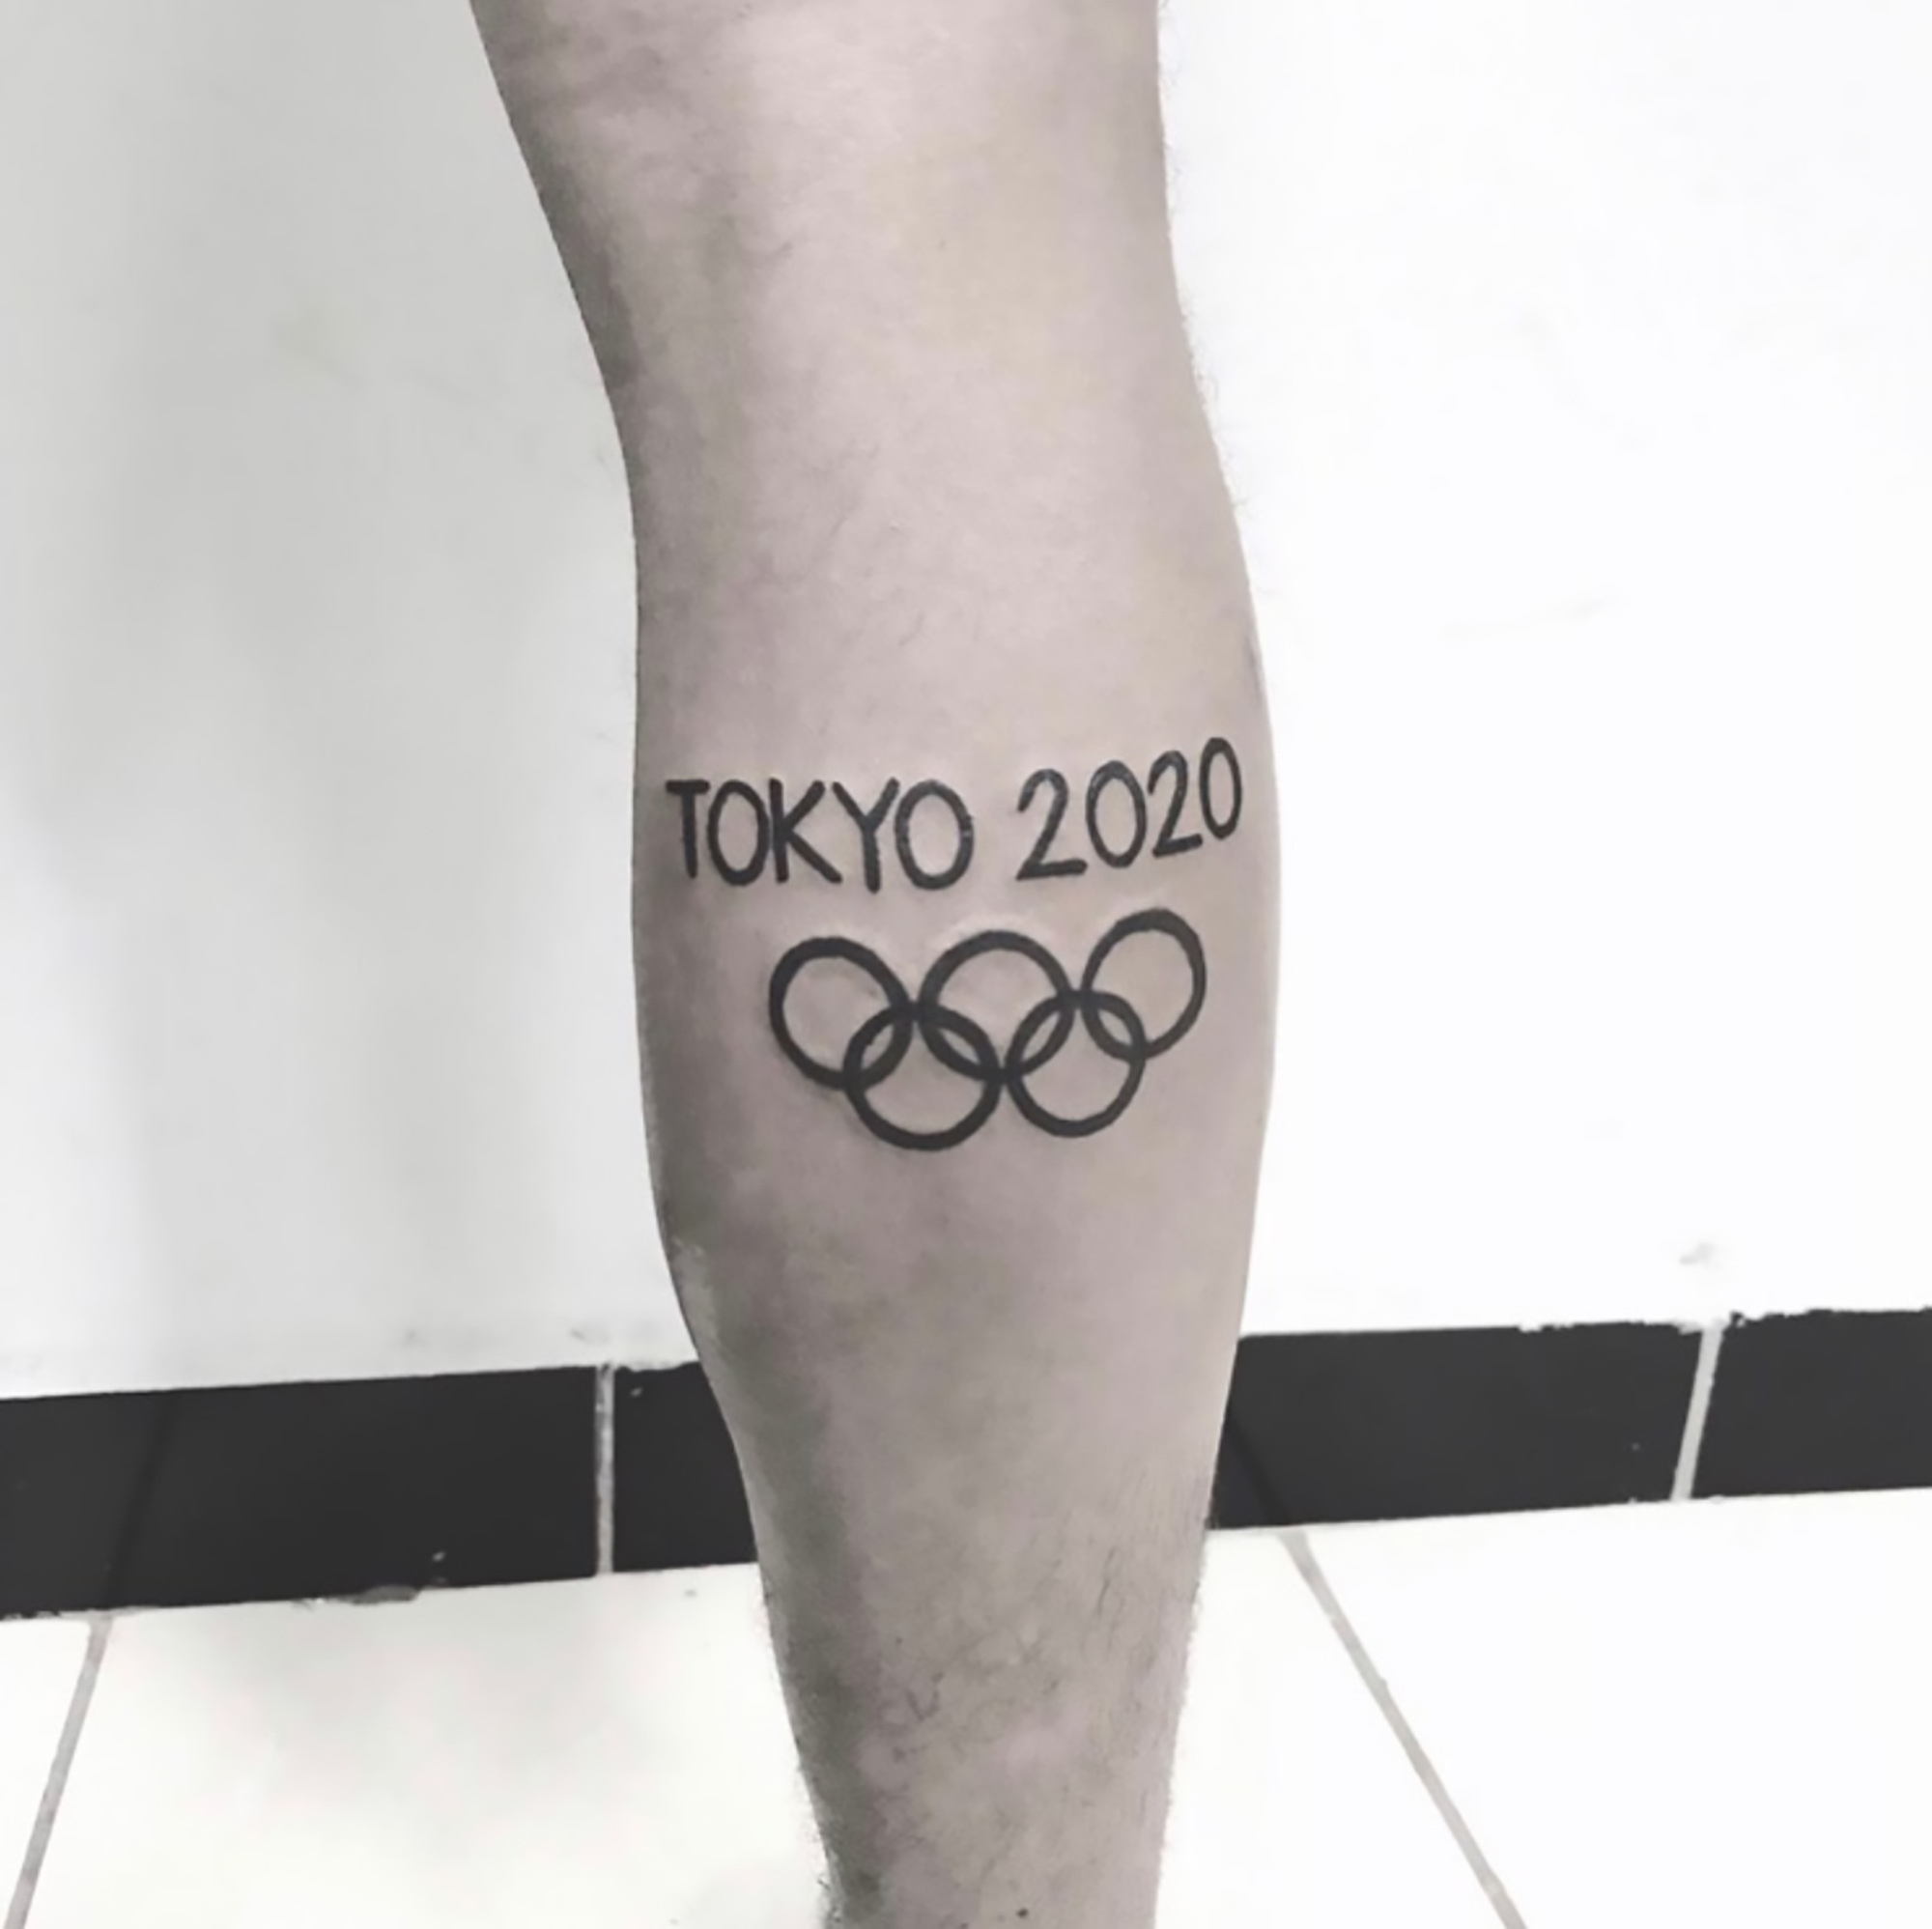 Read more about the article Olympic Runner Asks For Help To Change Tokyo 2020 Tattoo